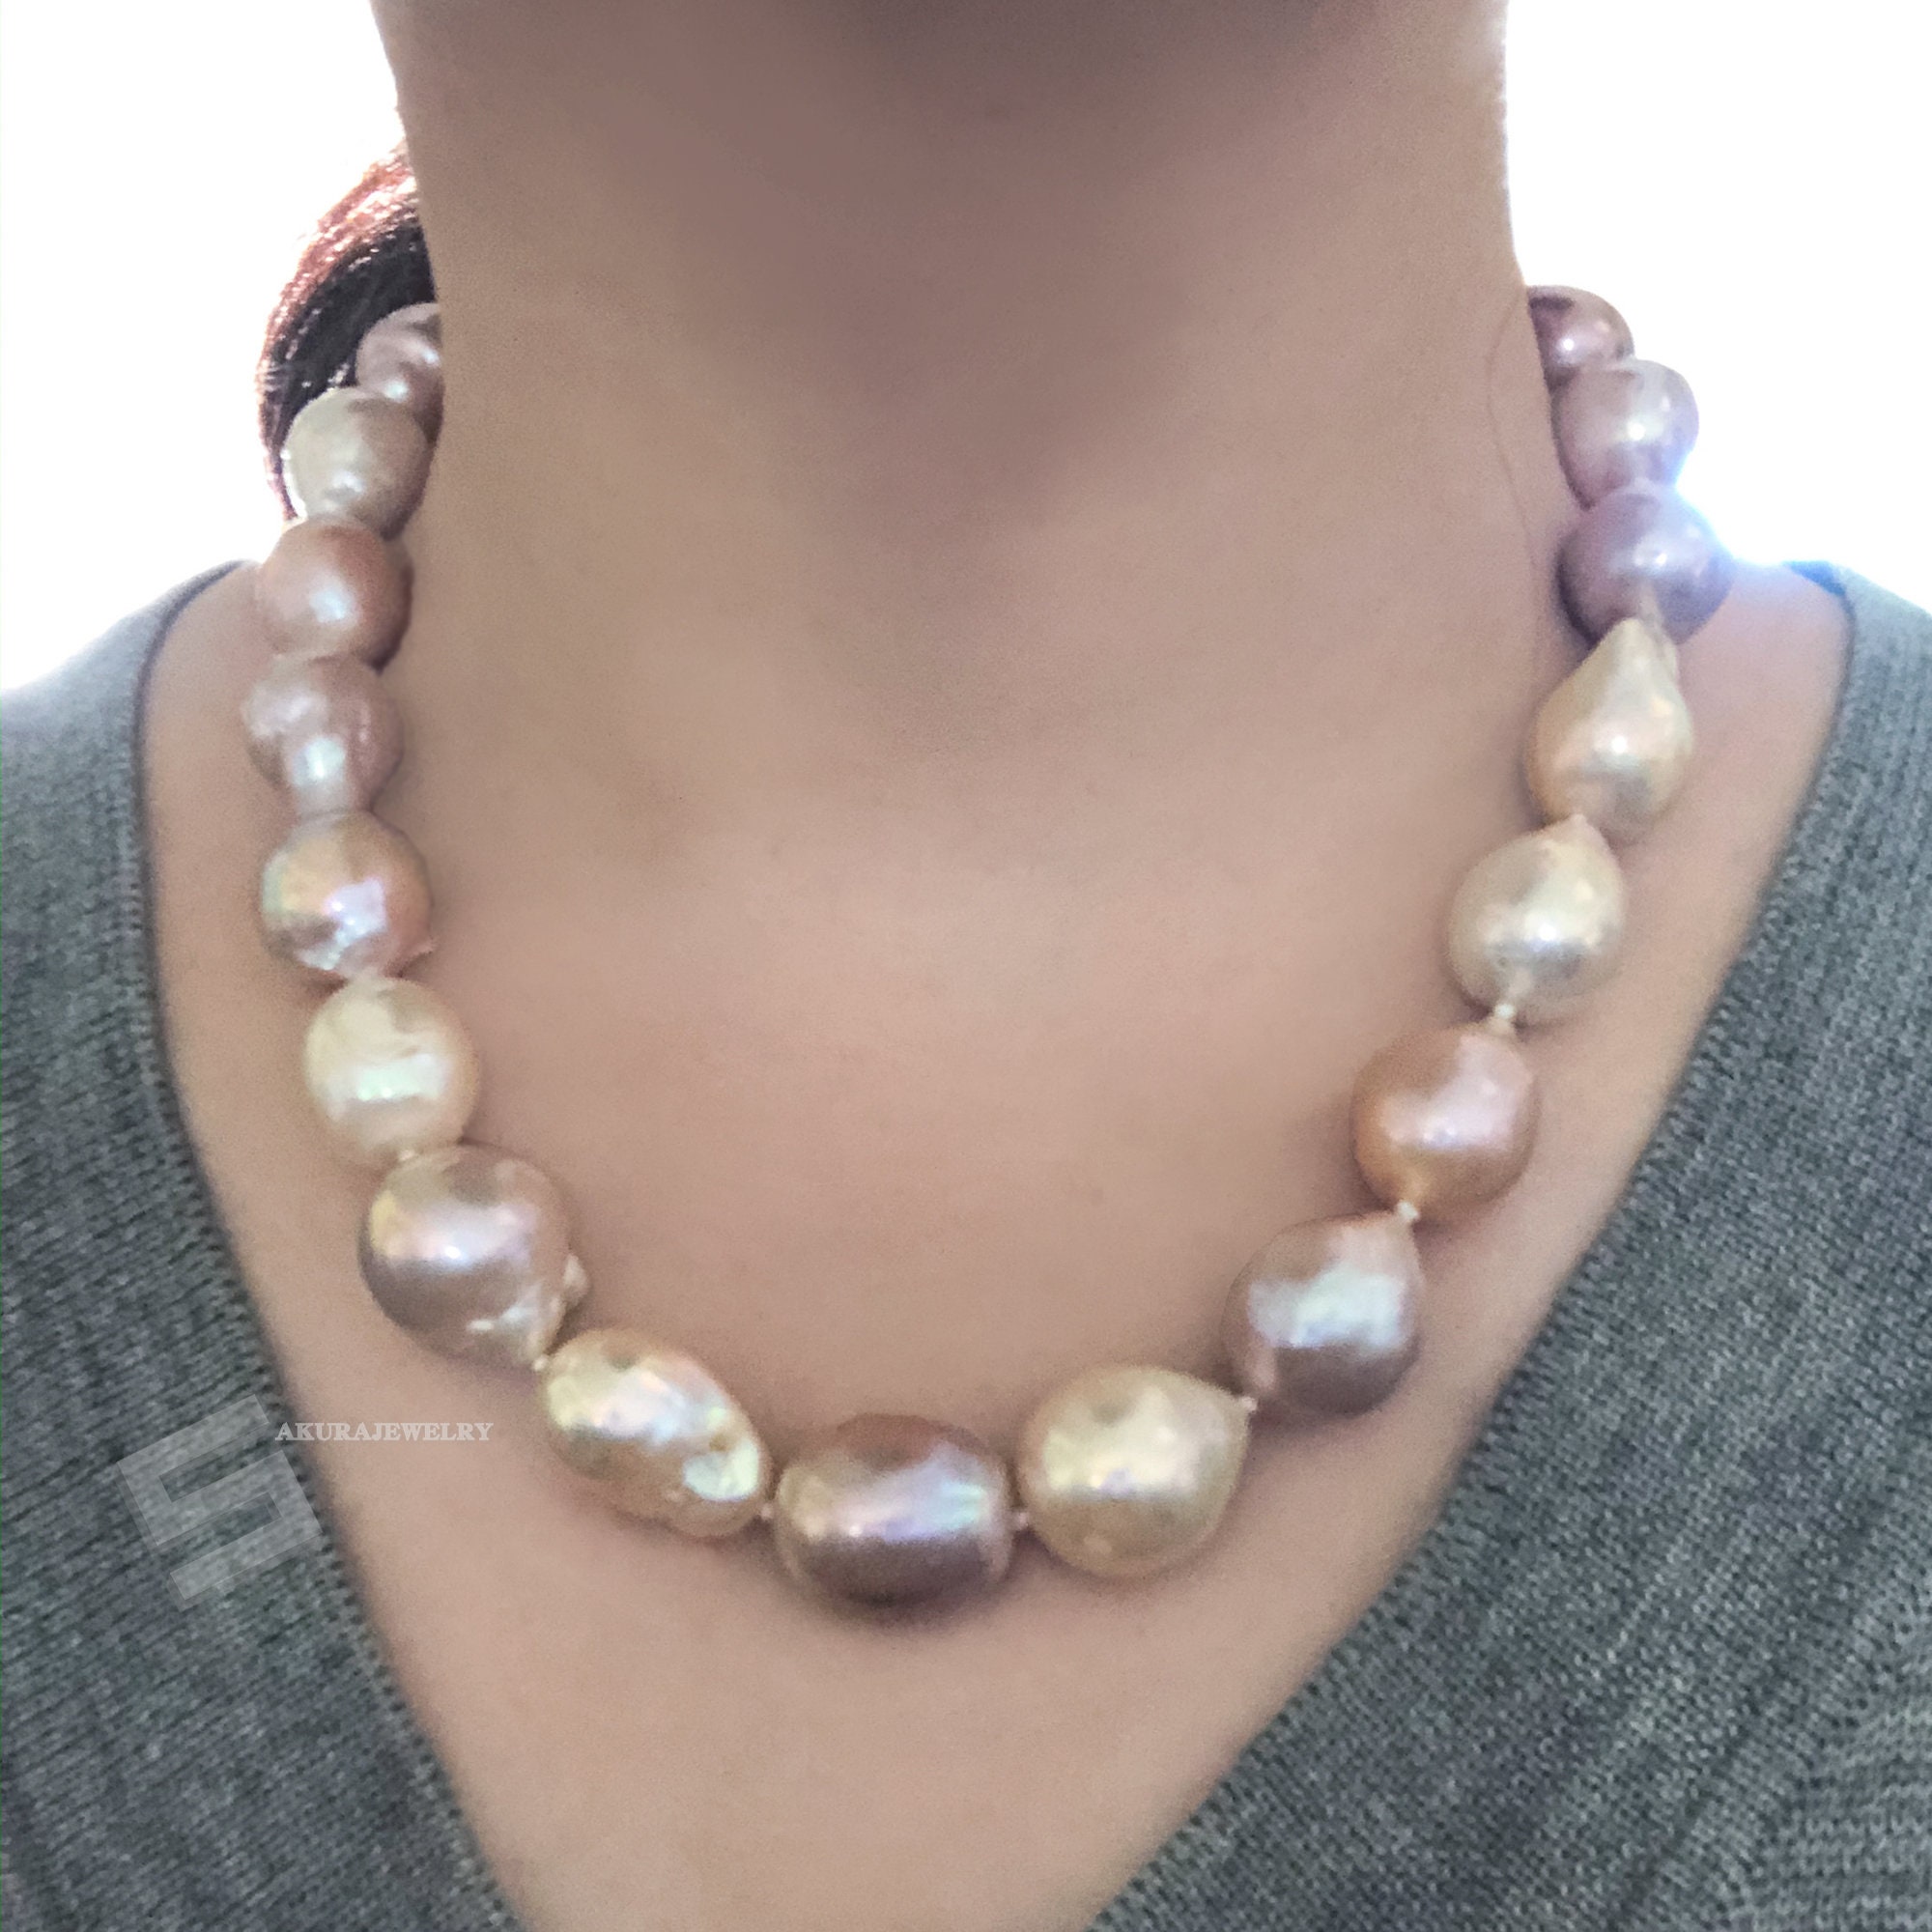 Large Baroque Cultured Pearls Necklace 13-15MM Natural 